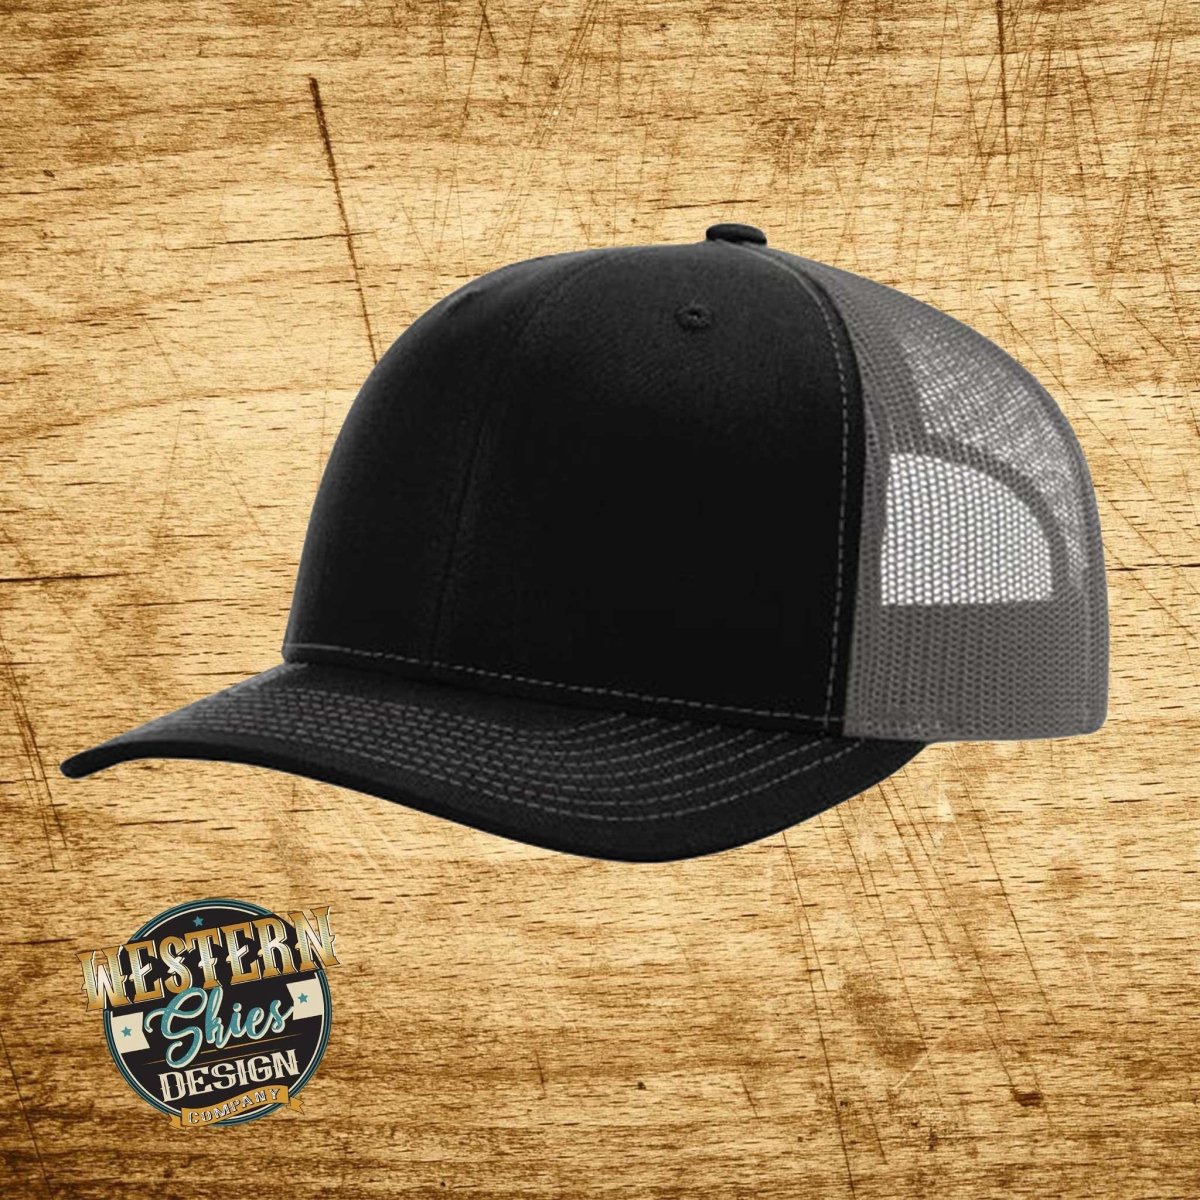 New Richardson 112 Trucker Color Drops – Western Skies Design Company